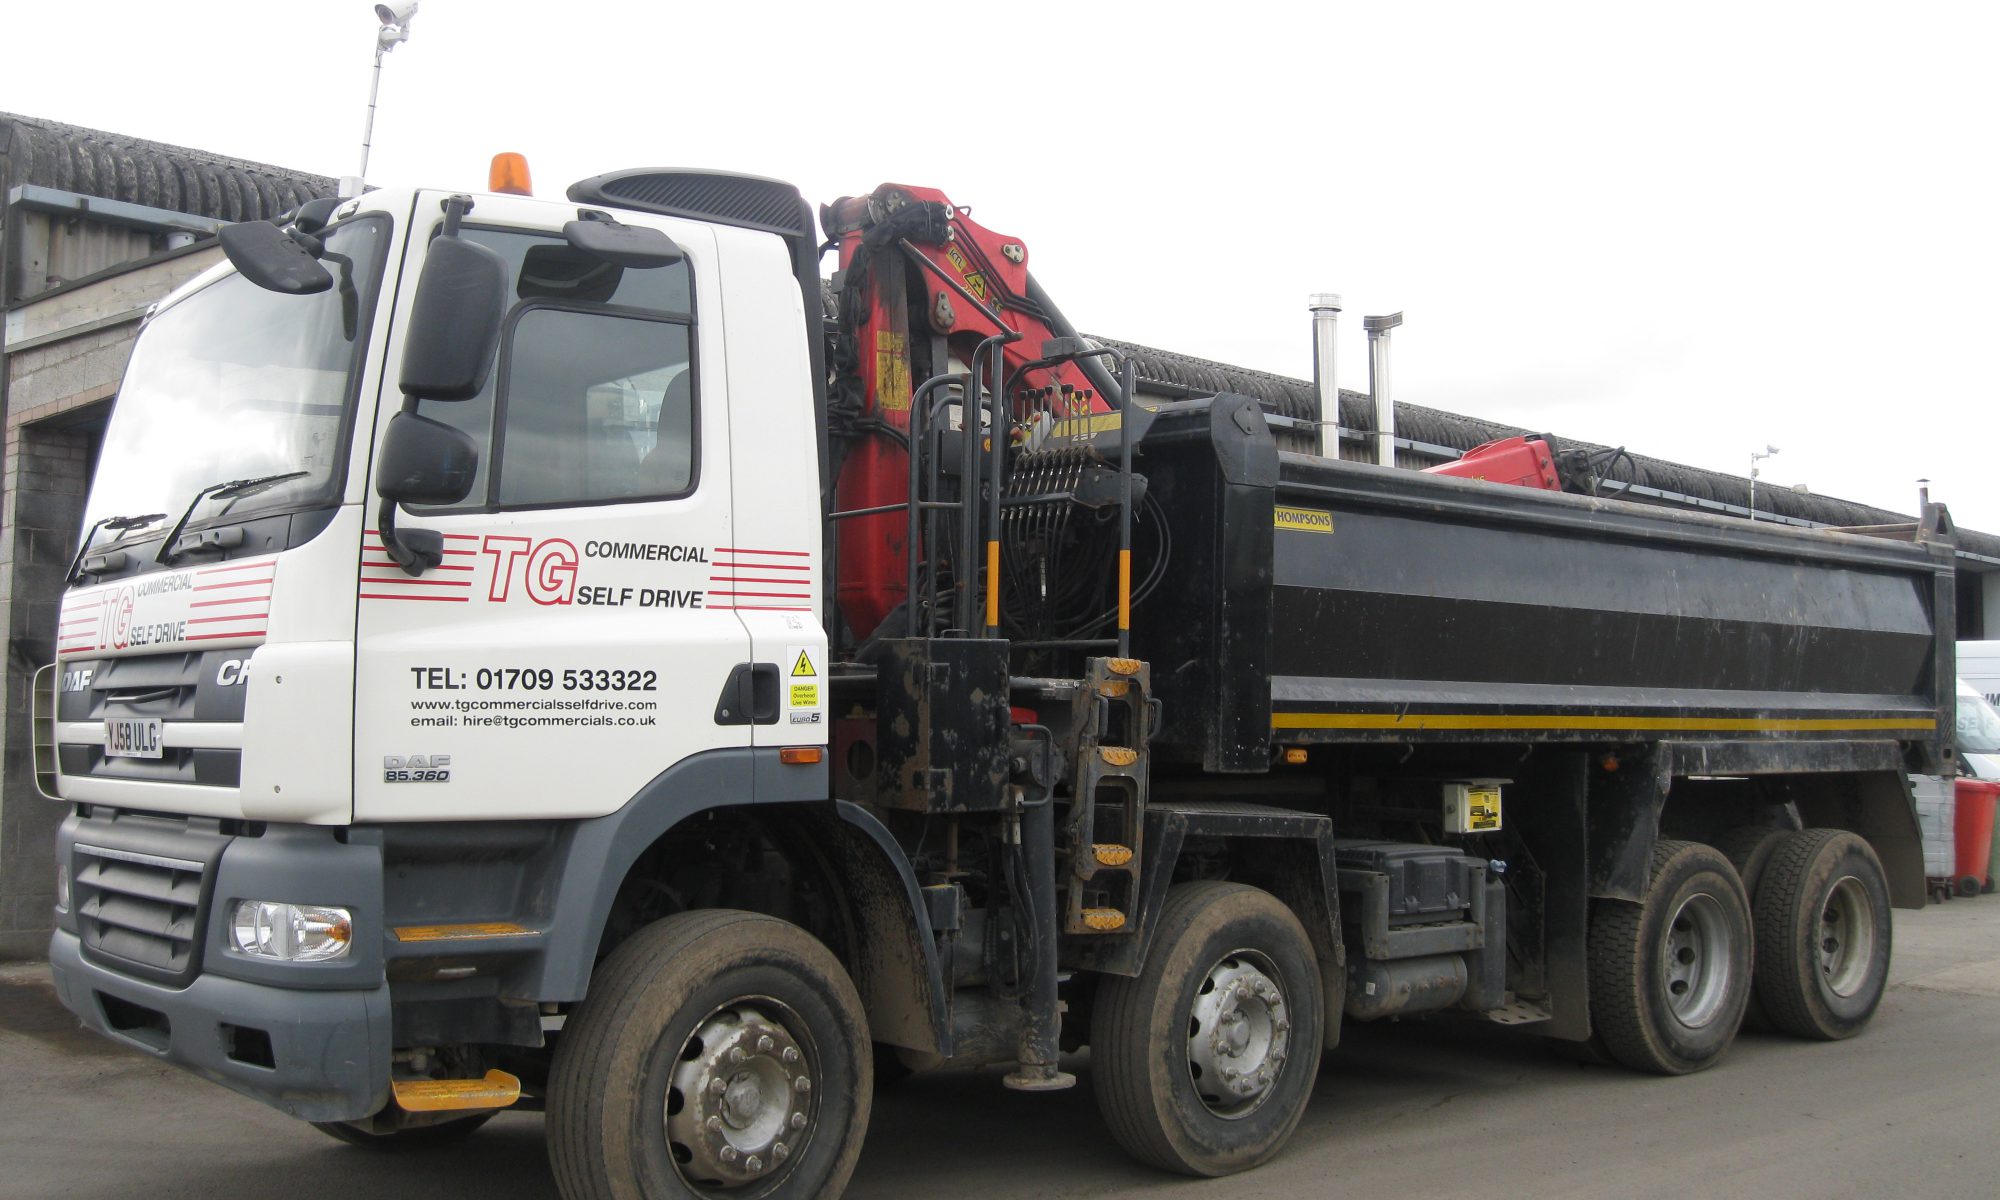 What are the uses of a 7.5 tonne truck?